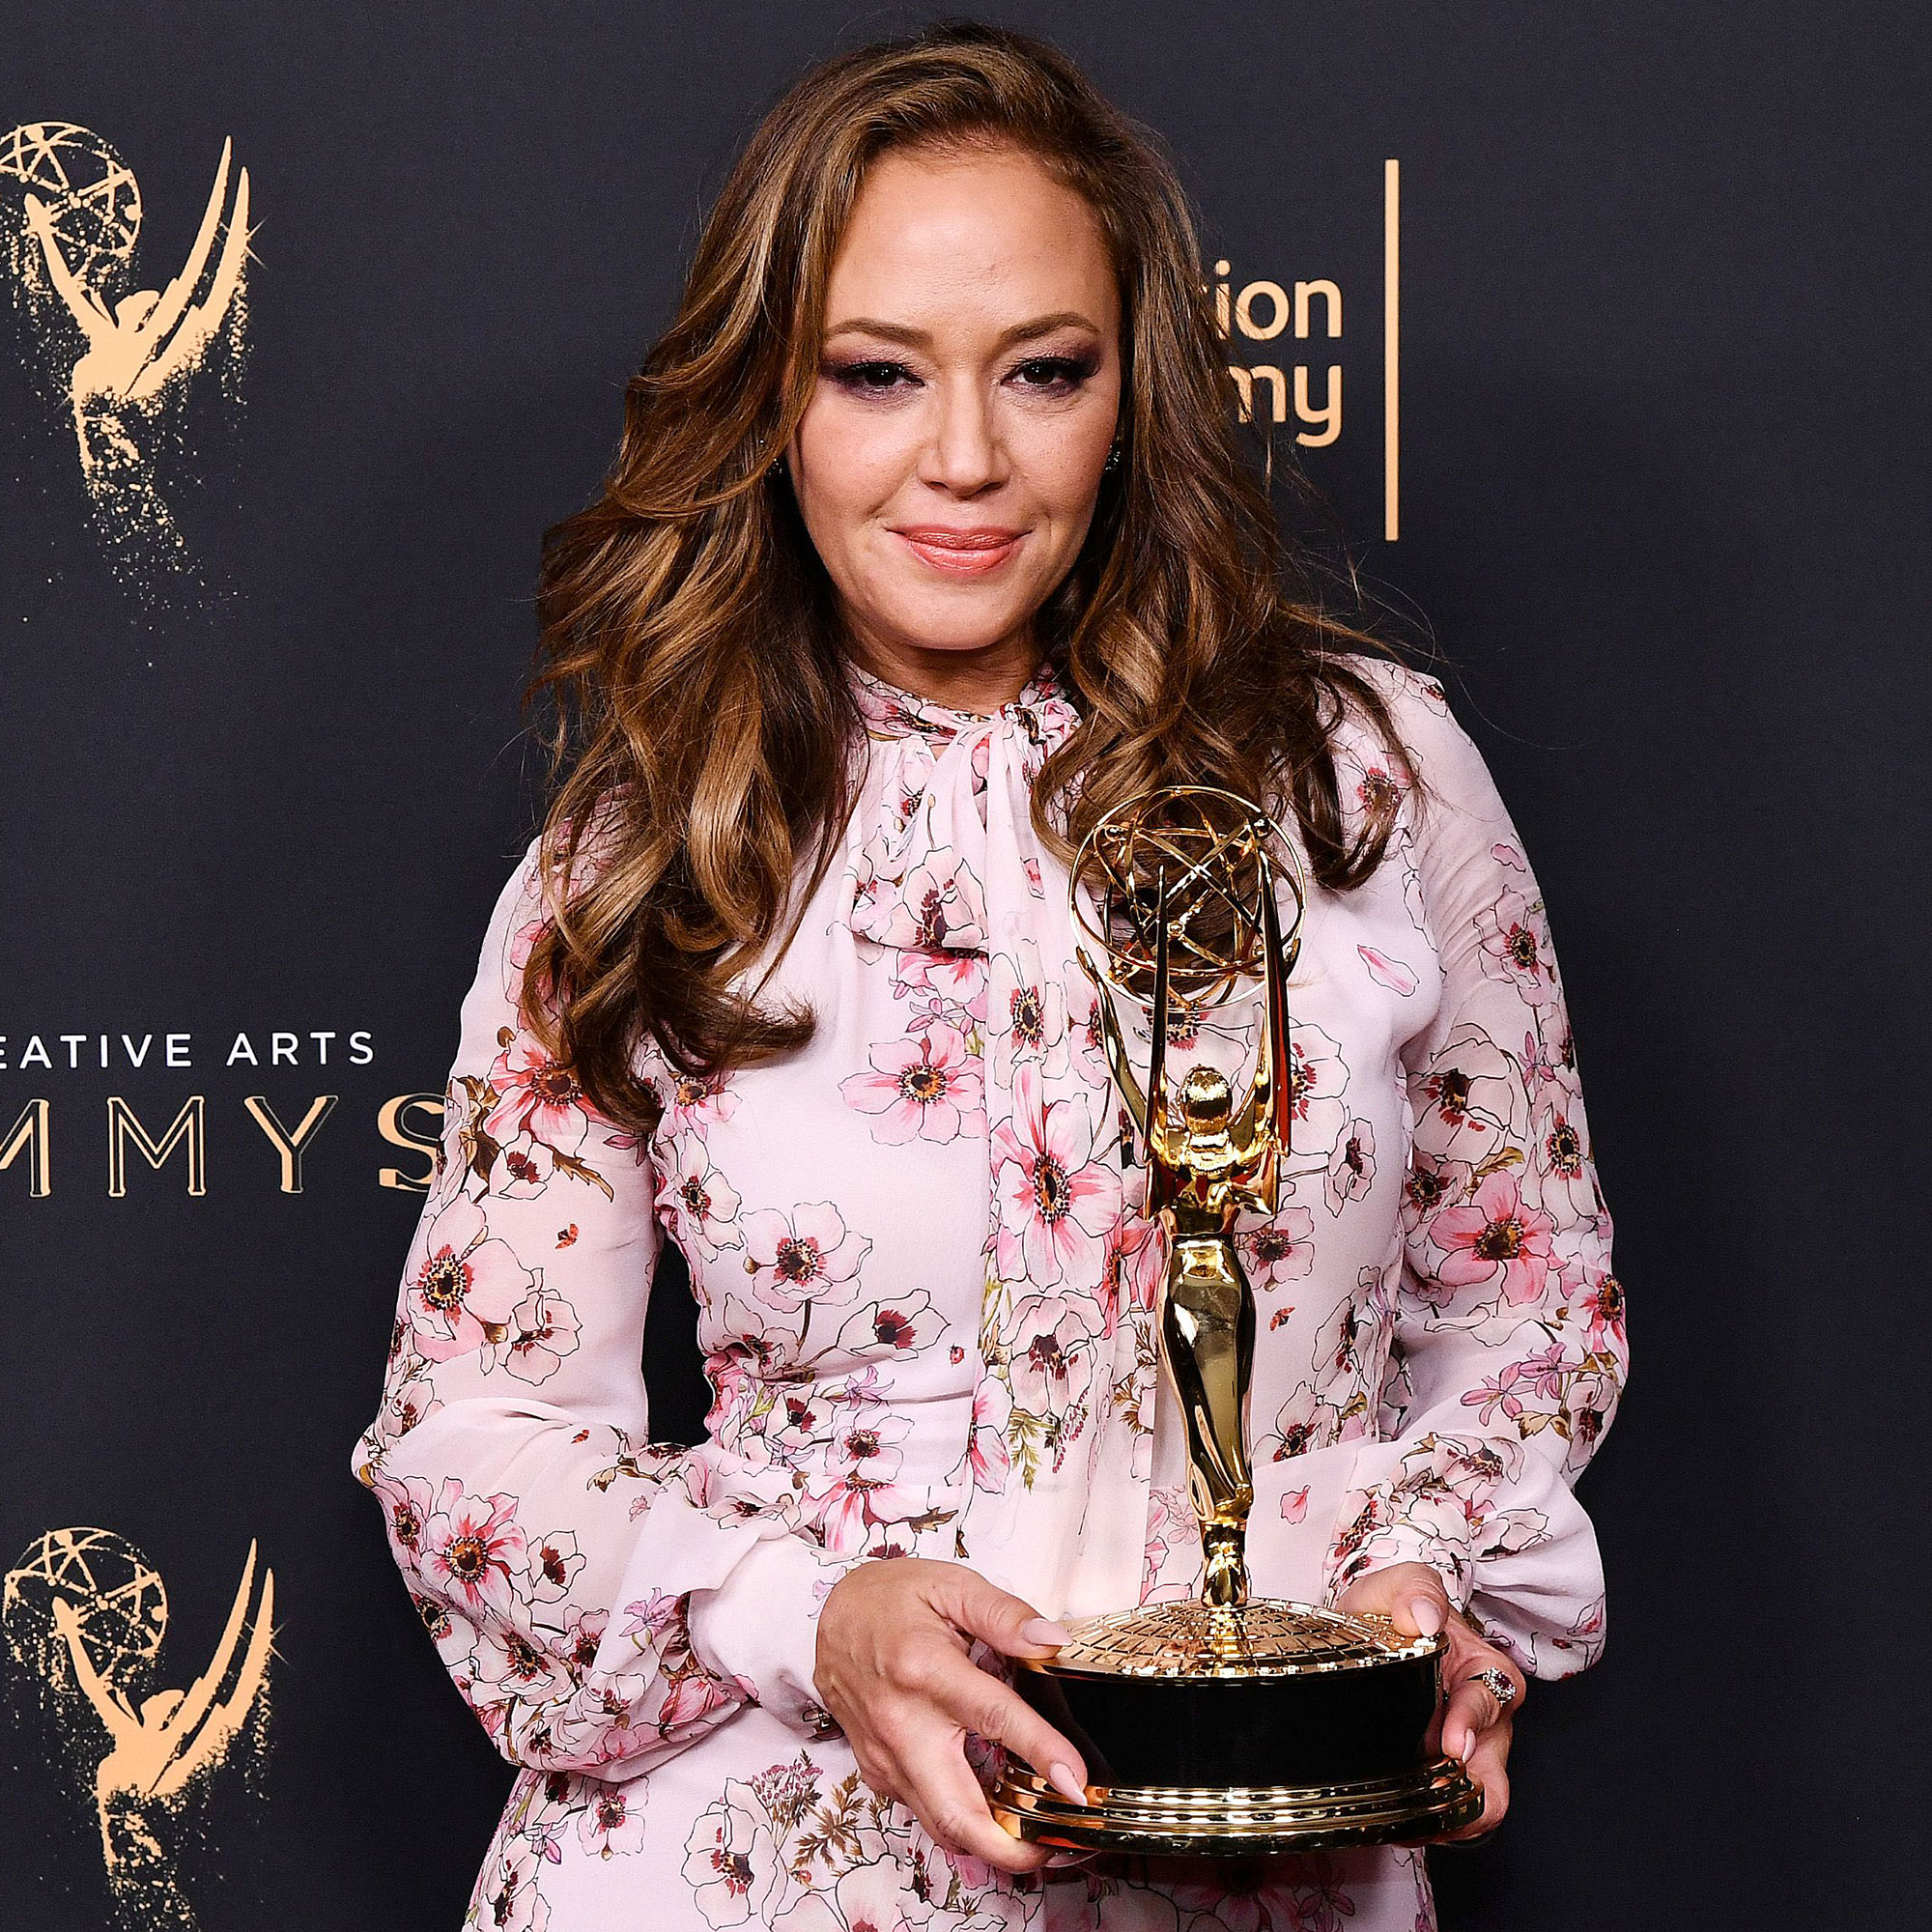 Leah Remini’s battle with Scientology over the years: It’s ‘really bad’